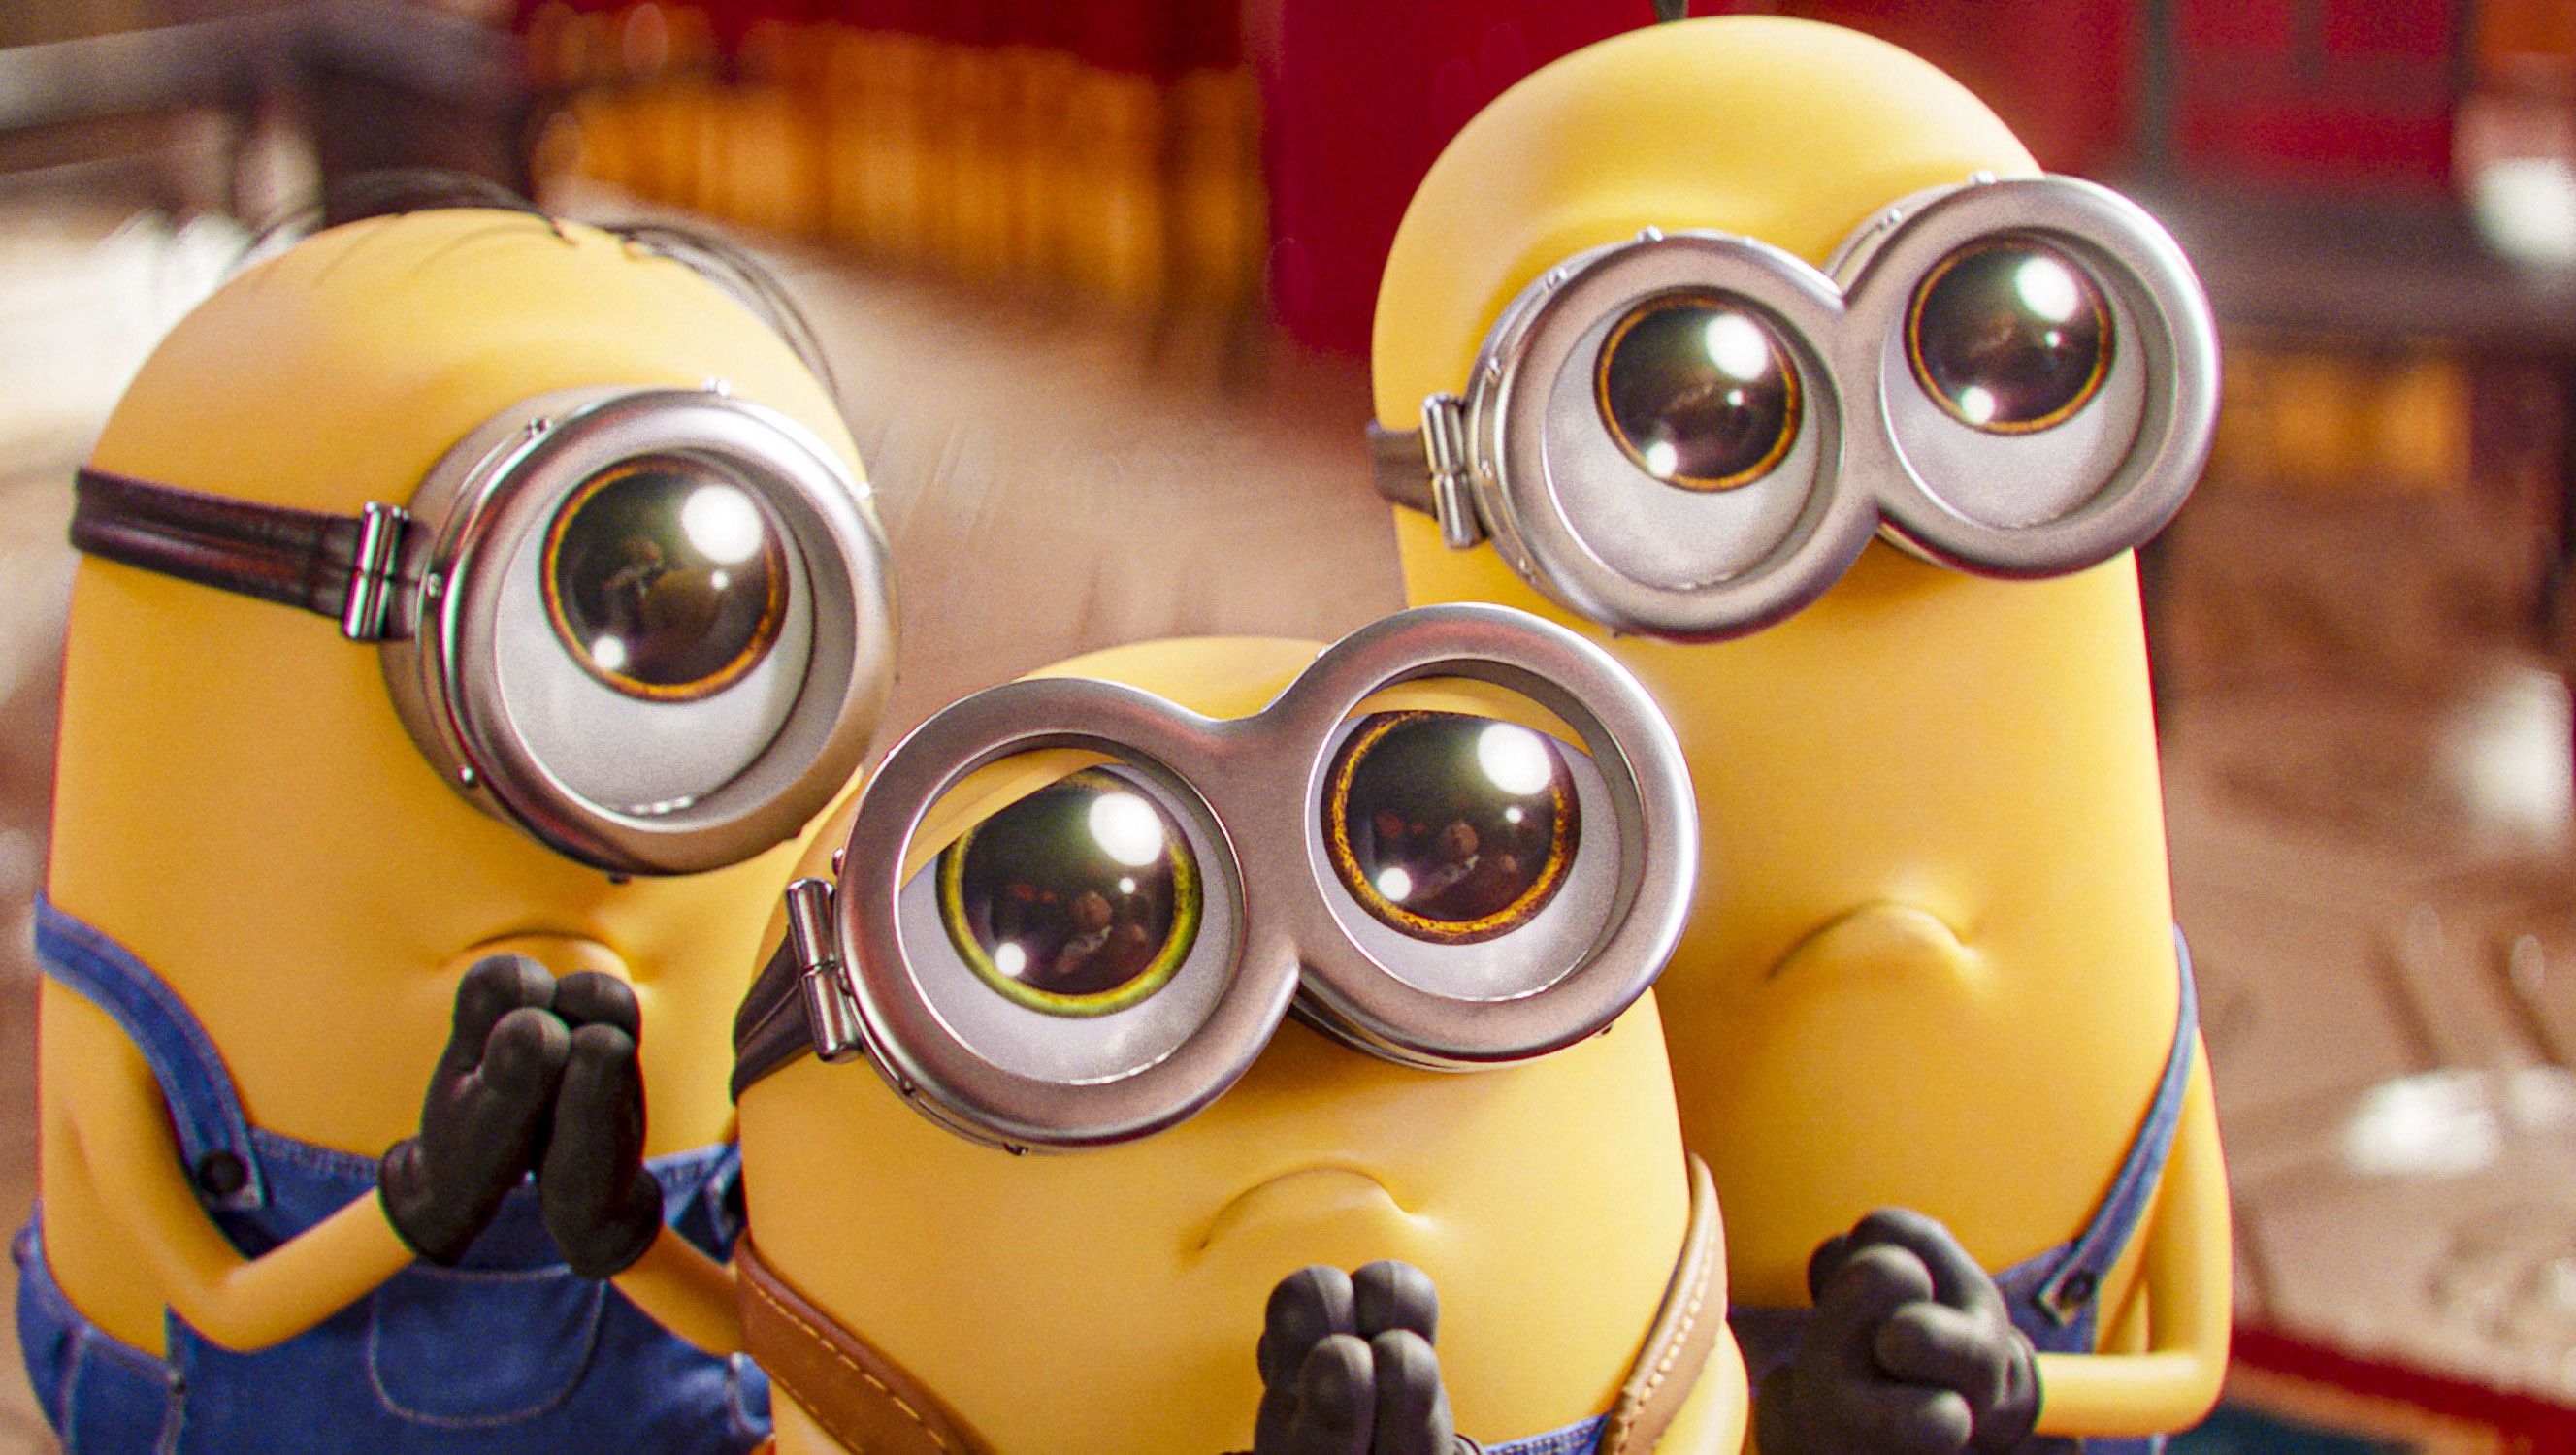 minions hunger games